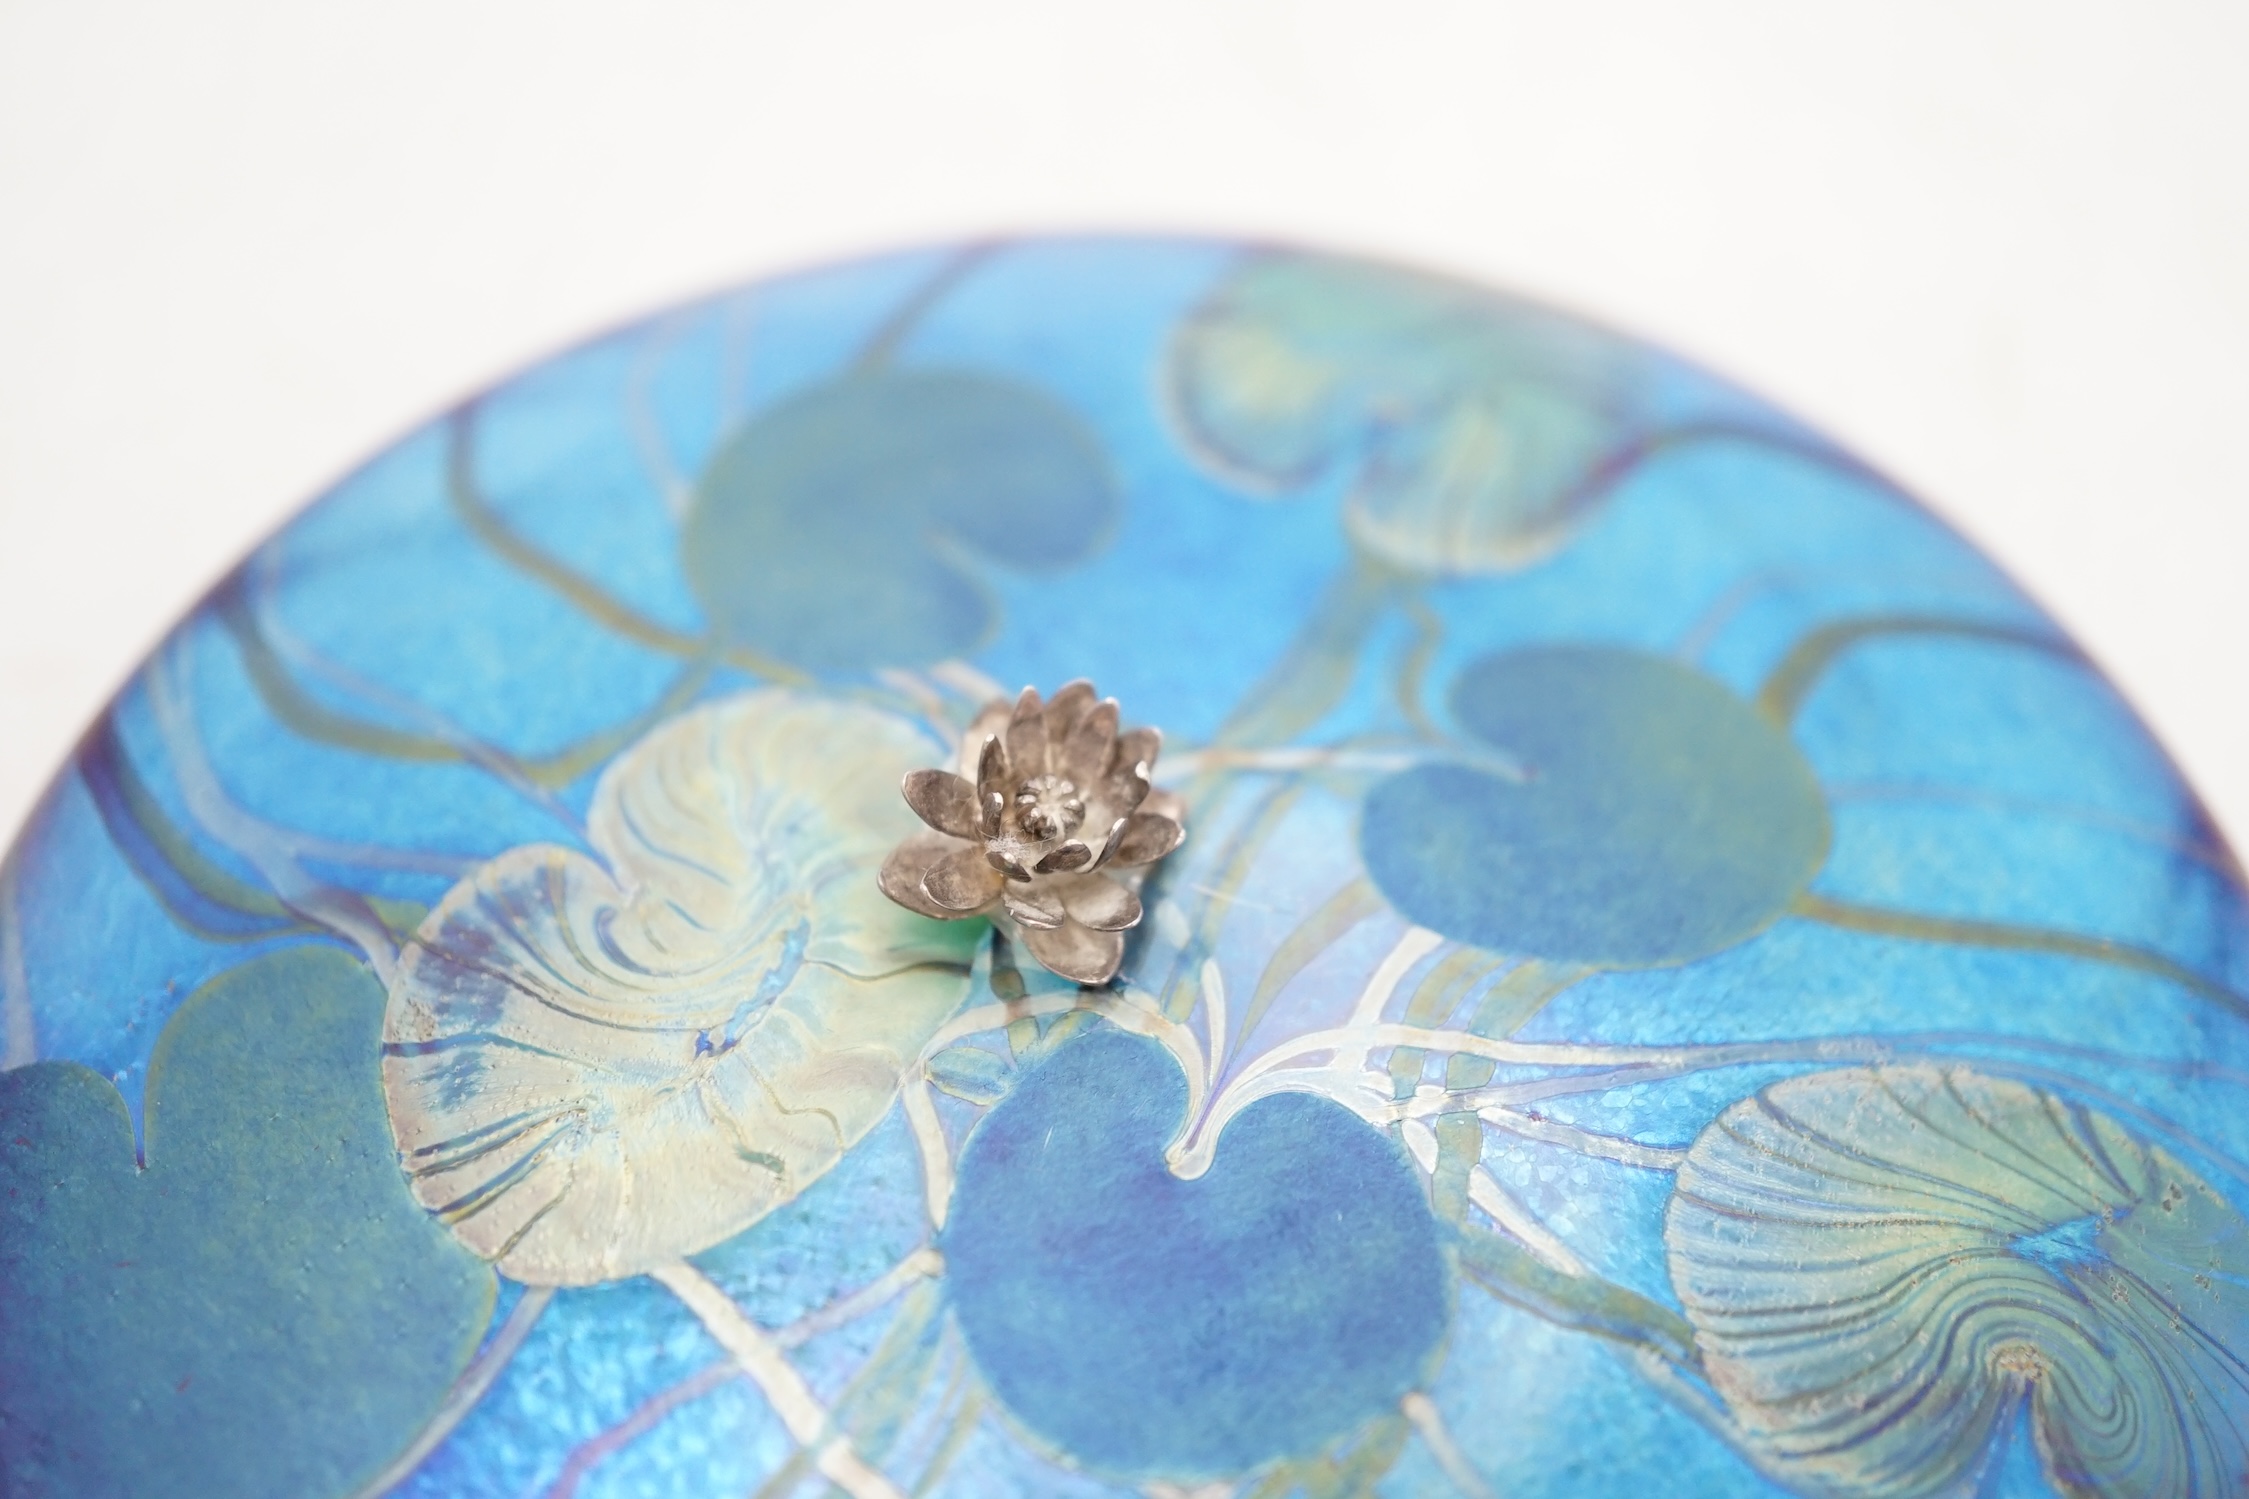 A John Ditchfield for Glasform paperweight, disc shaped with lily pad decoration and metal frog mounted in the centre,11cm diameter. Condition - frog needs re-gluing, glass paperweight good